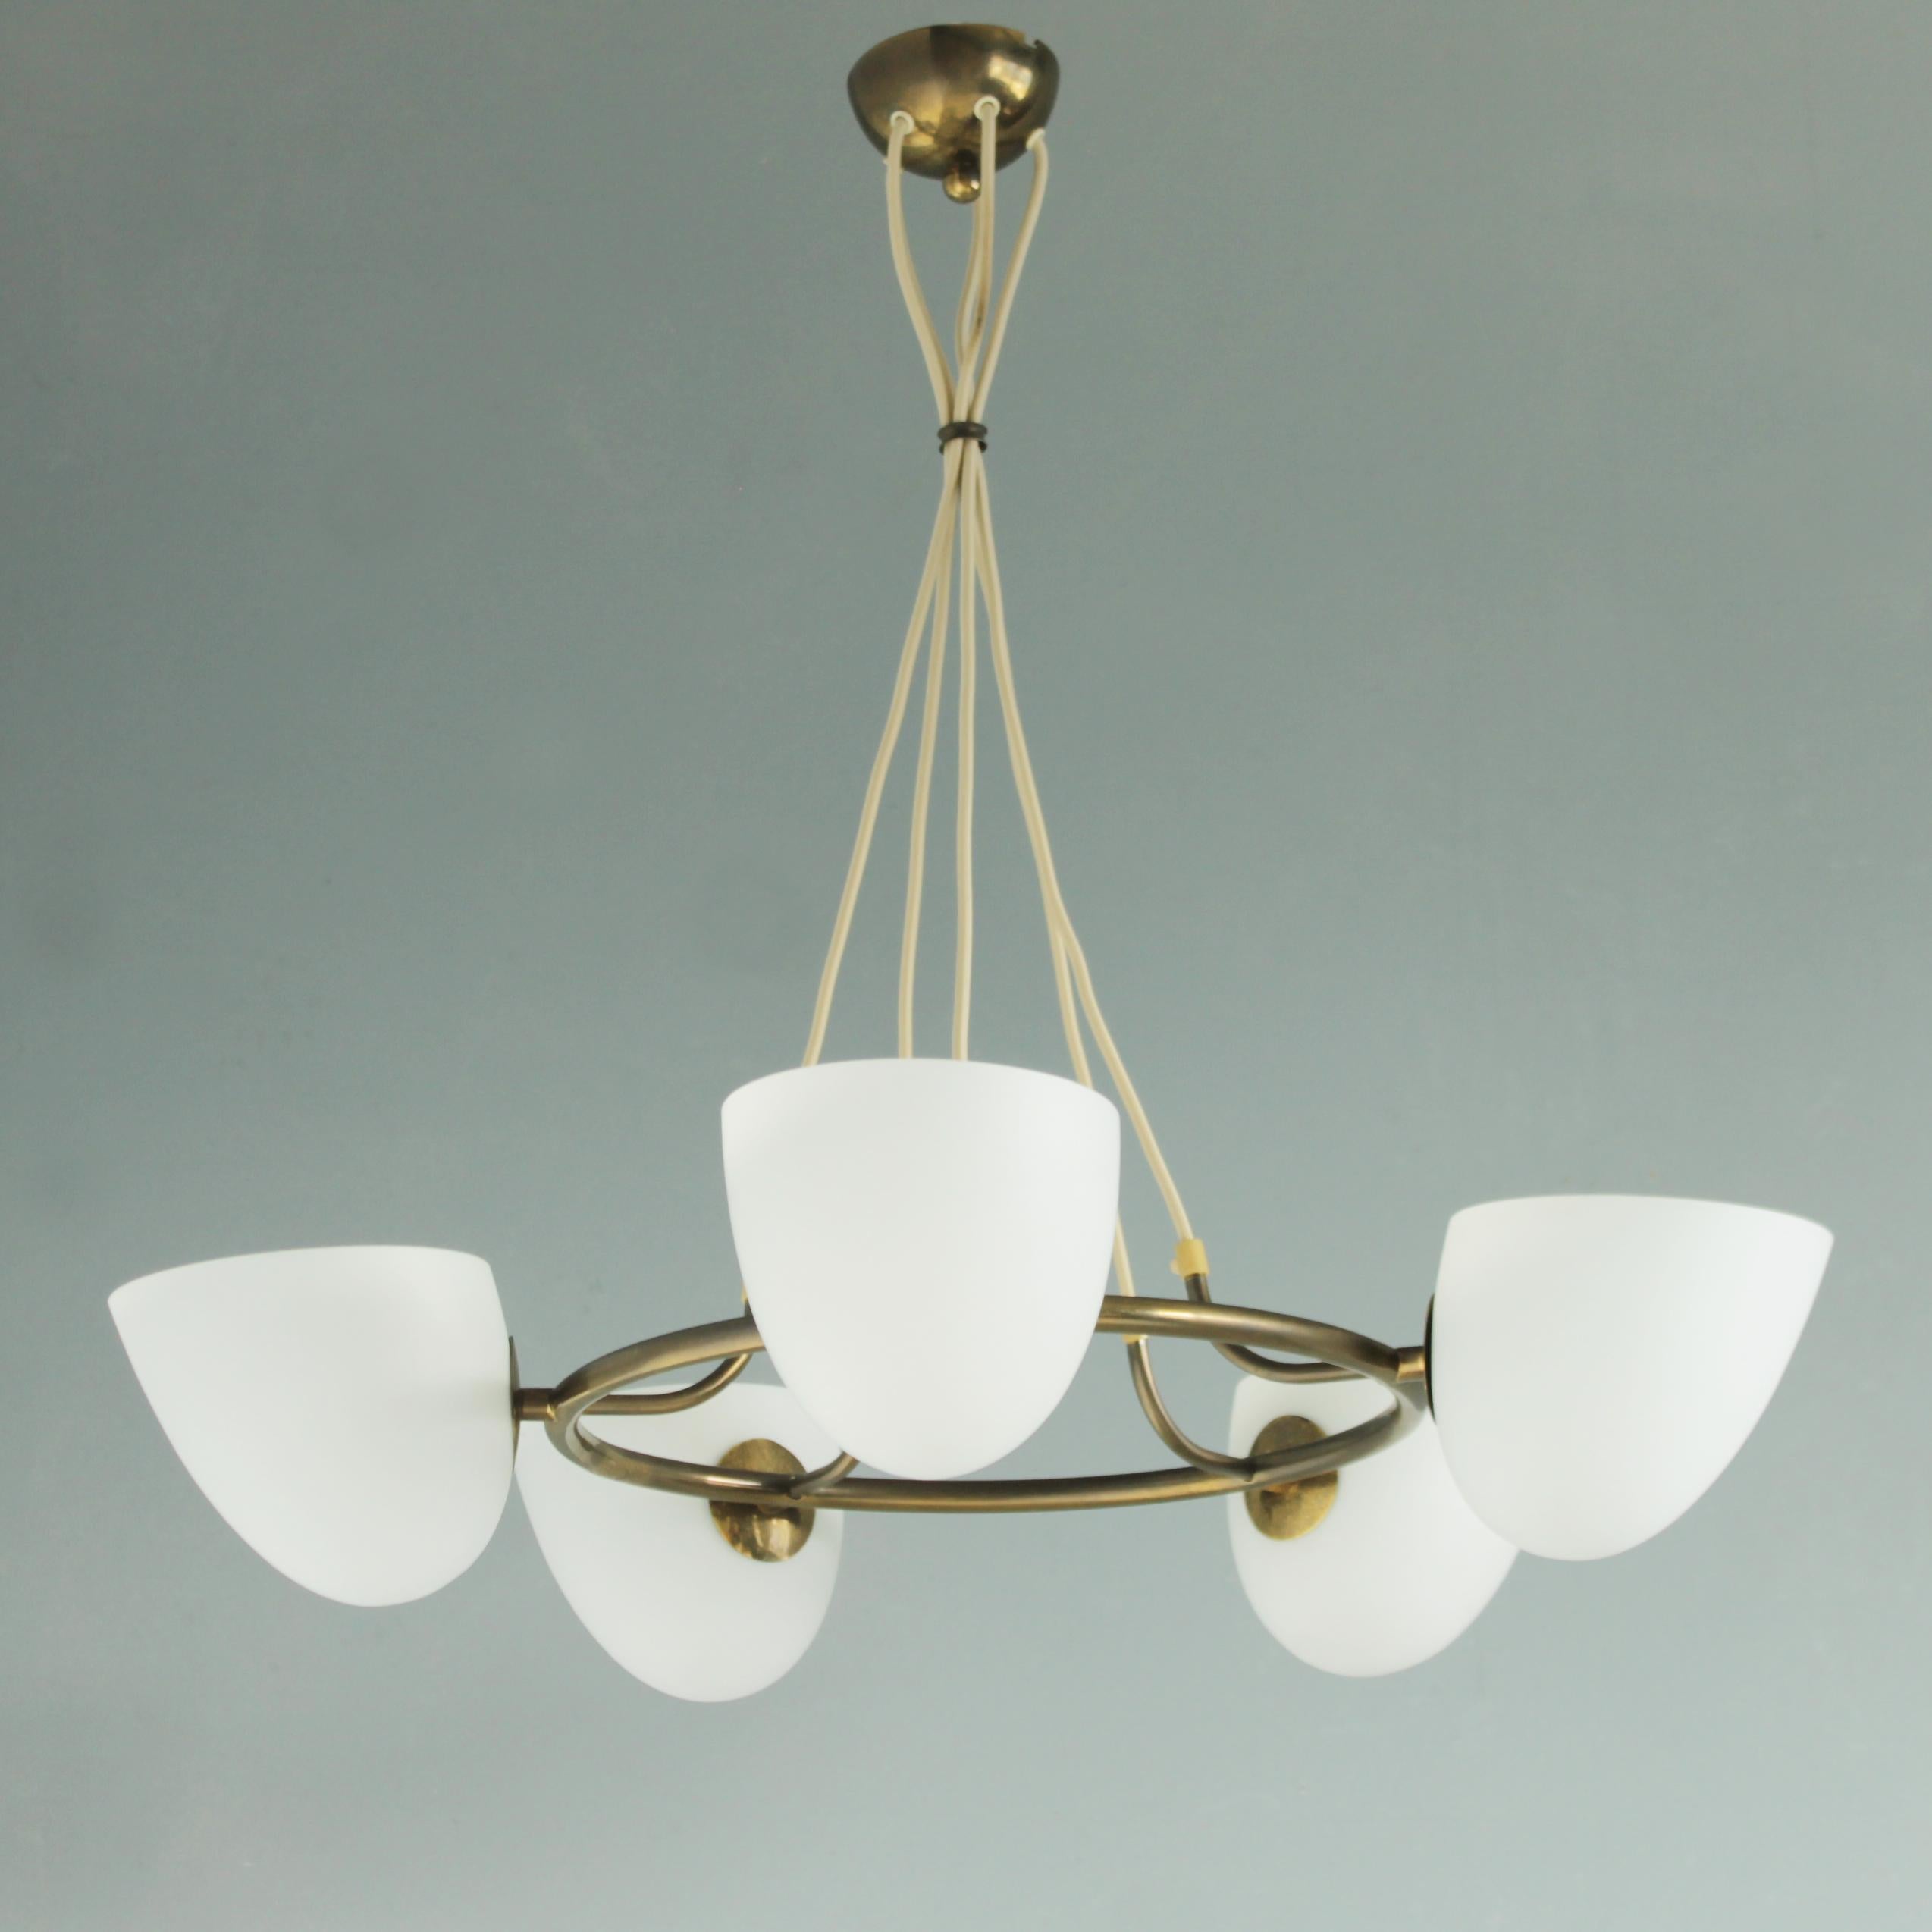 Mid Century five-light chandelier in brass and glass, probably from the Swedish designer Hans Bergstrom. Scandinavian elegant chandelier, not to large with an atmospheric light. Measurements: from ceiling till drop: about 29,9 in. (76 cm), total